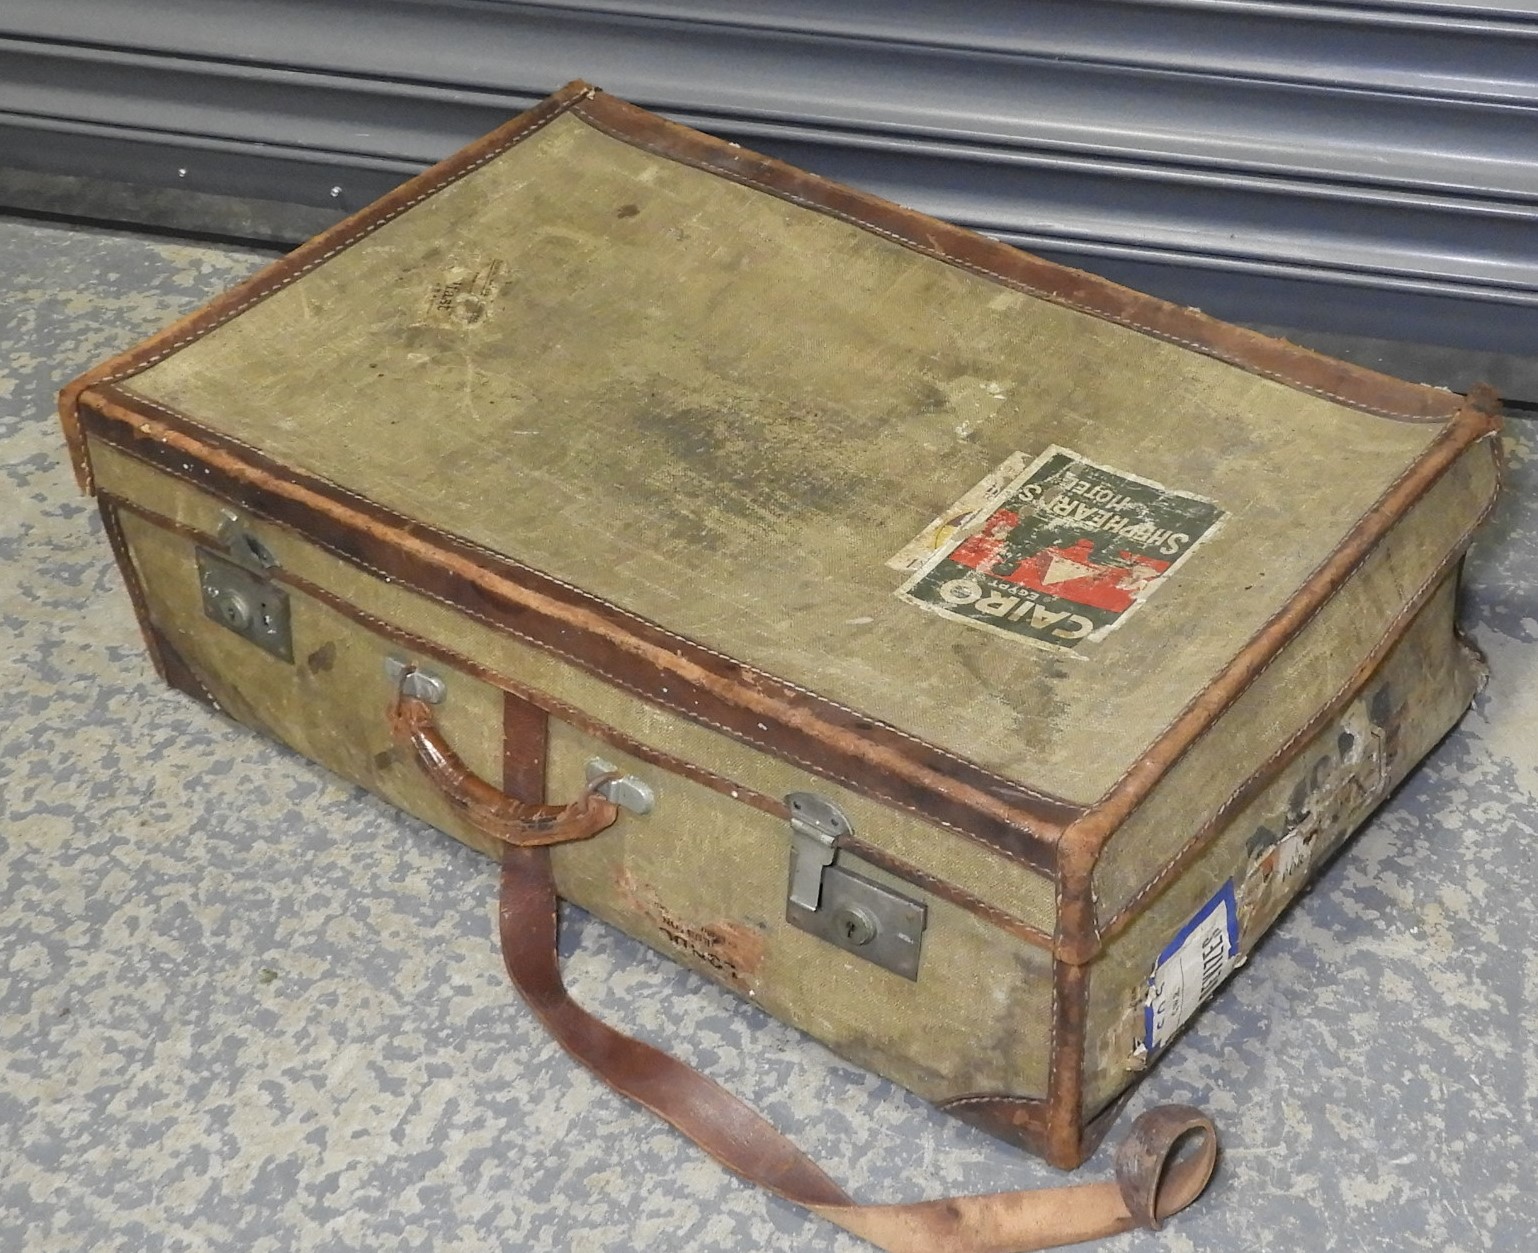 DE MOB SUITCASE WITH 37/42 PATTERN WEB TAGS - Image 2 of 2